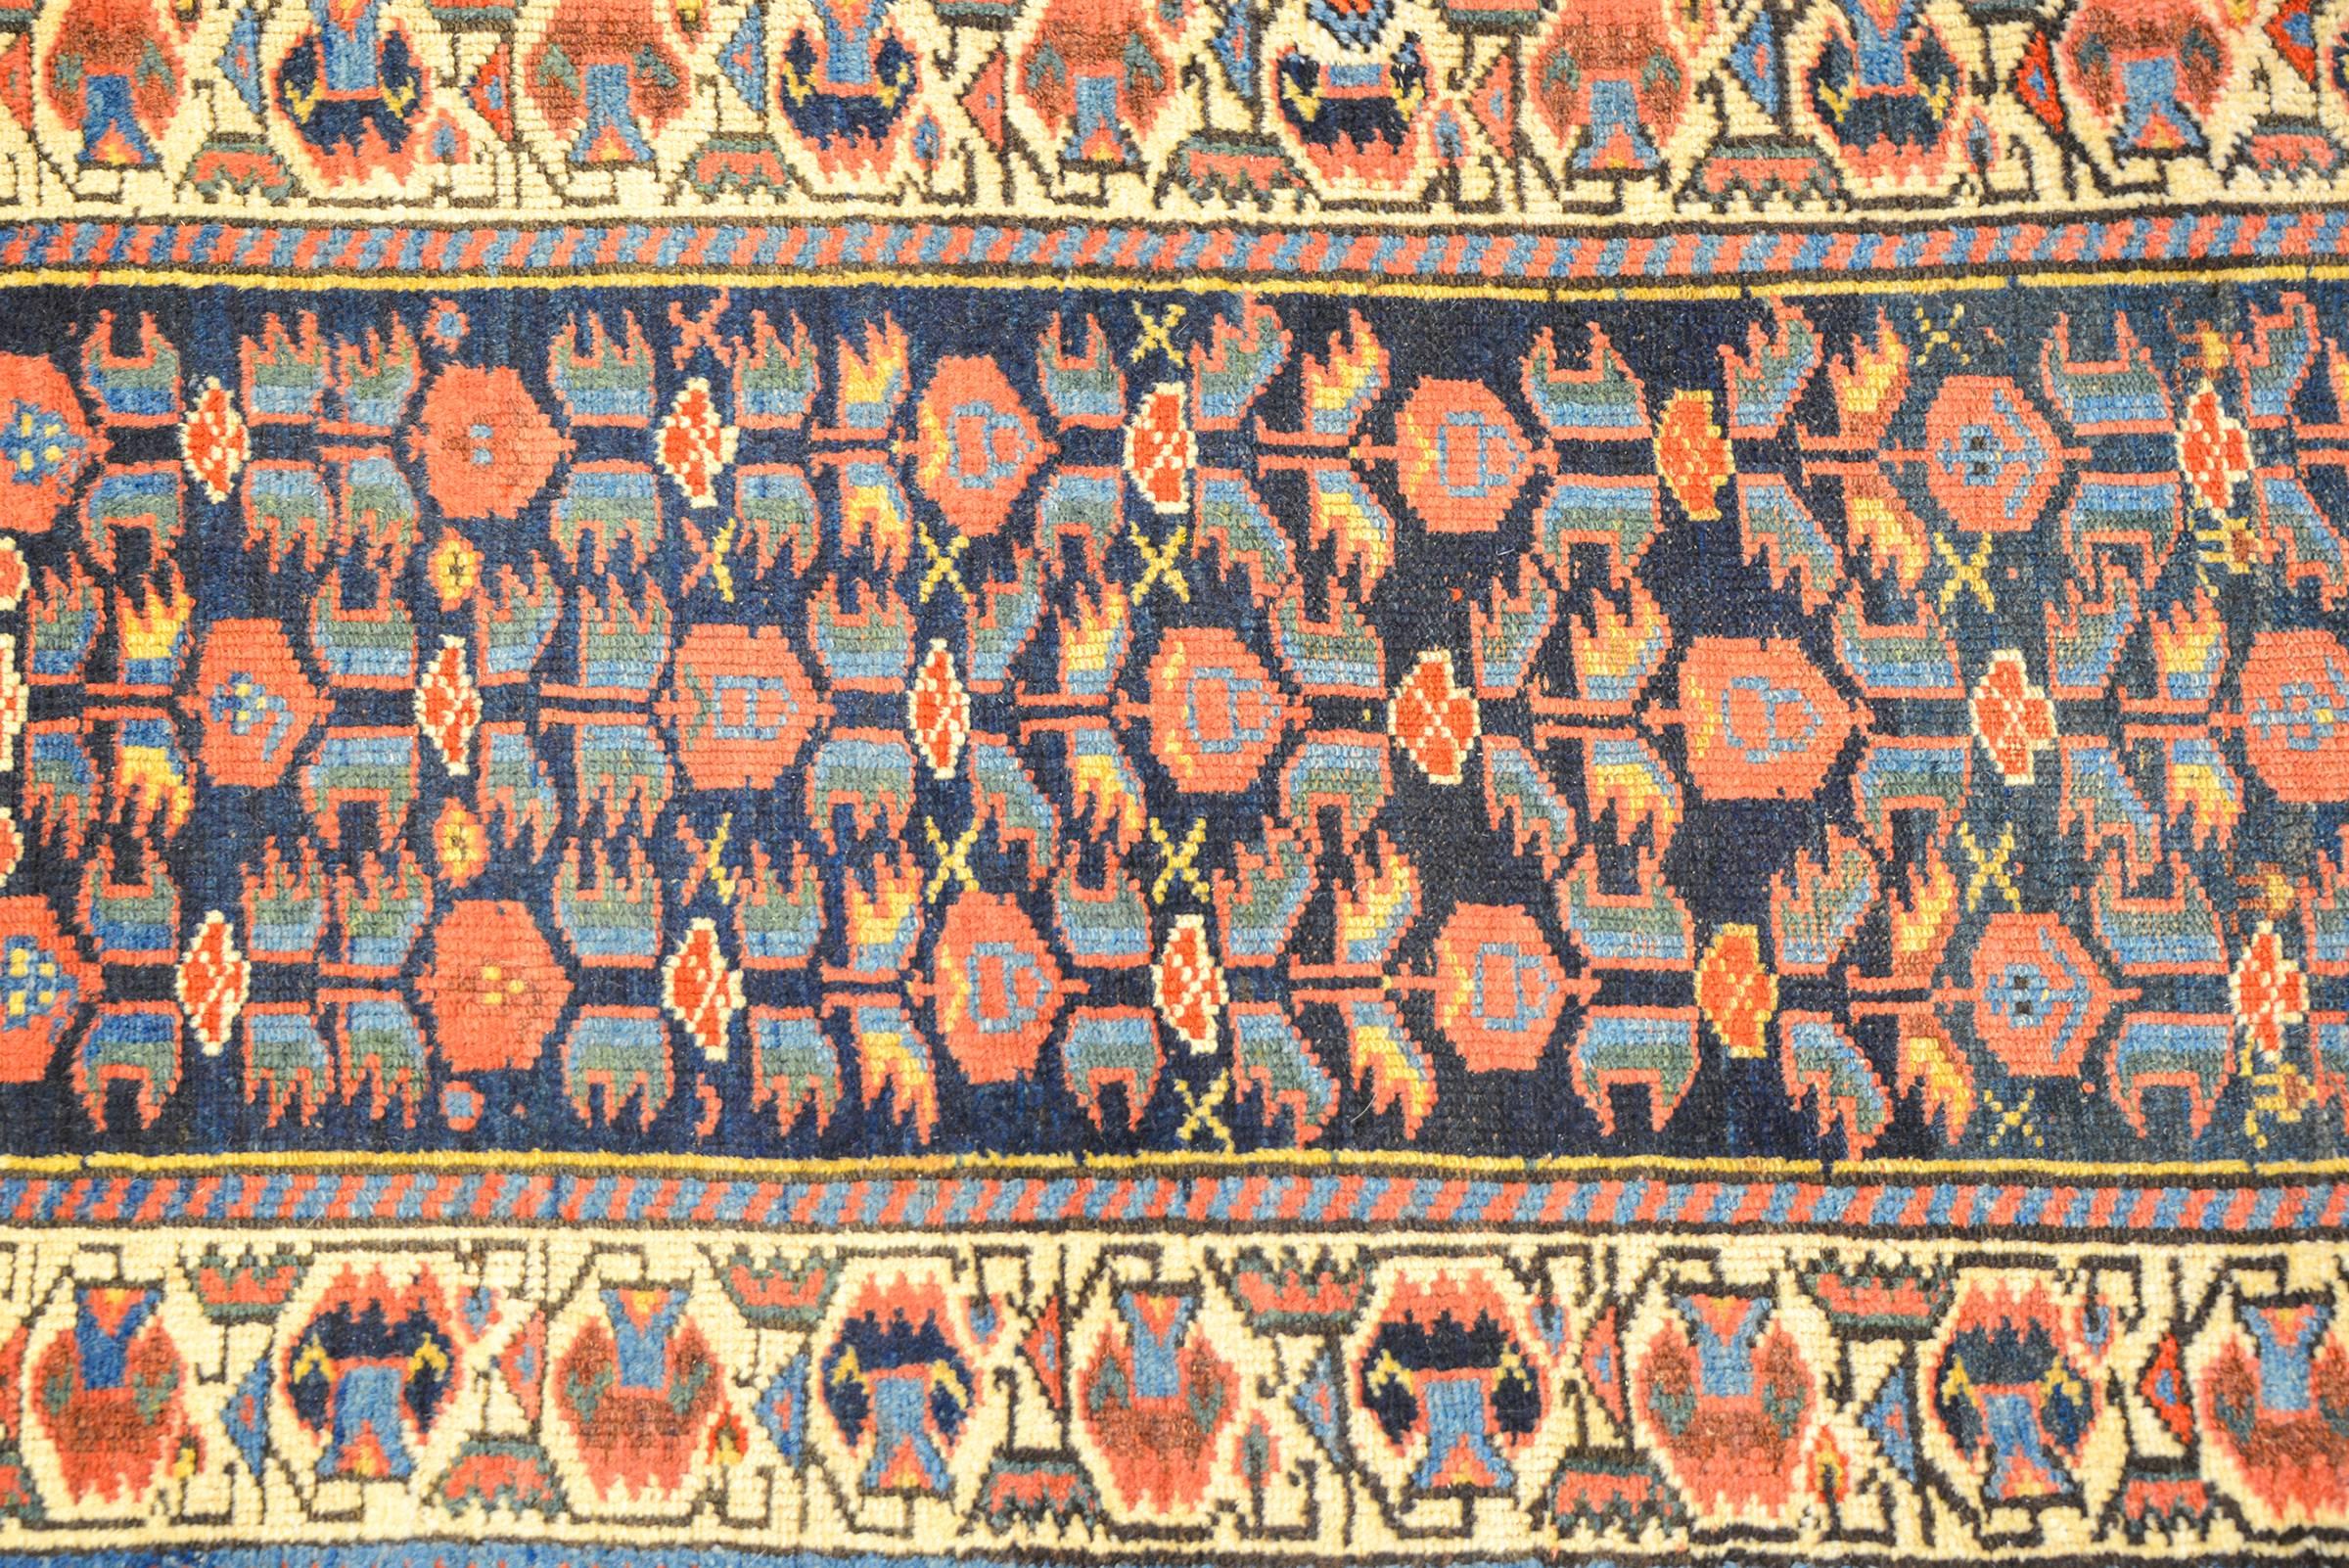 A wonderful early 20th century Persian Kurdish runner with a sweet all-over crimson and indigo floral pattern on a dark indigo background. The border is complex woven with multiple geometric and floral patterns in similar crimson and indigo colors.